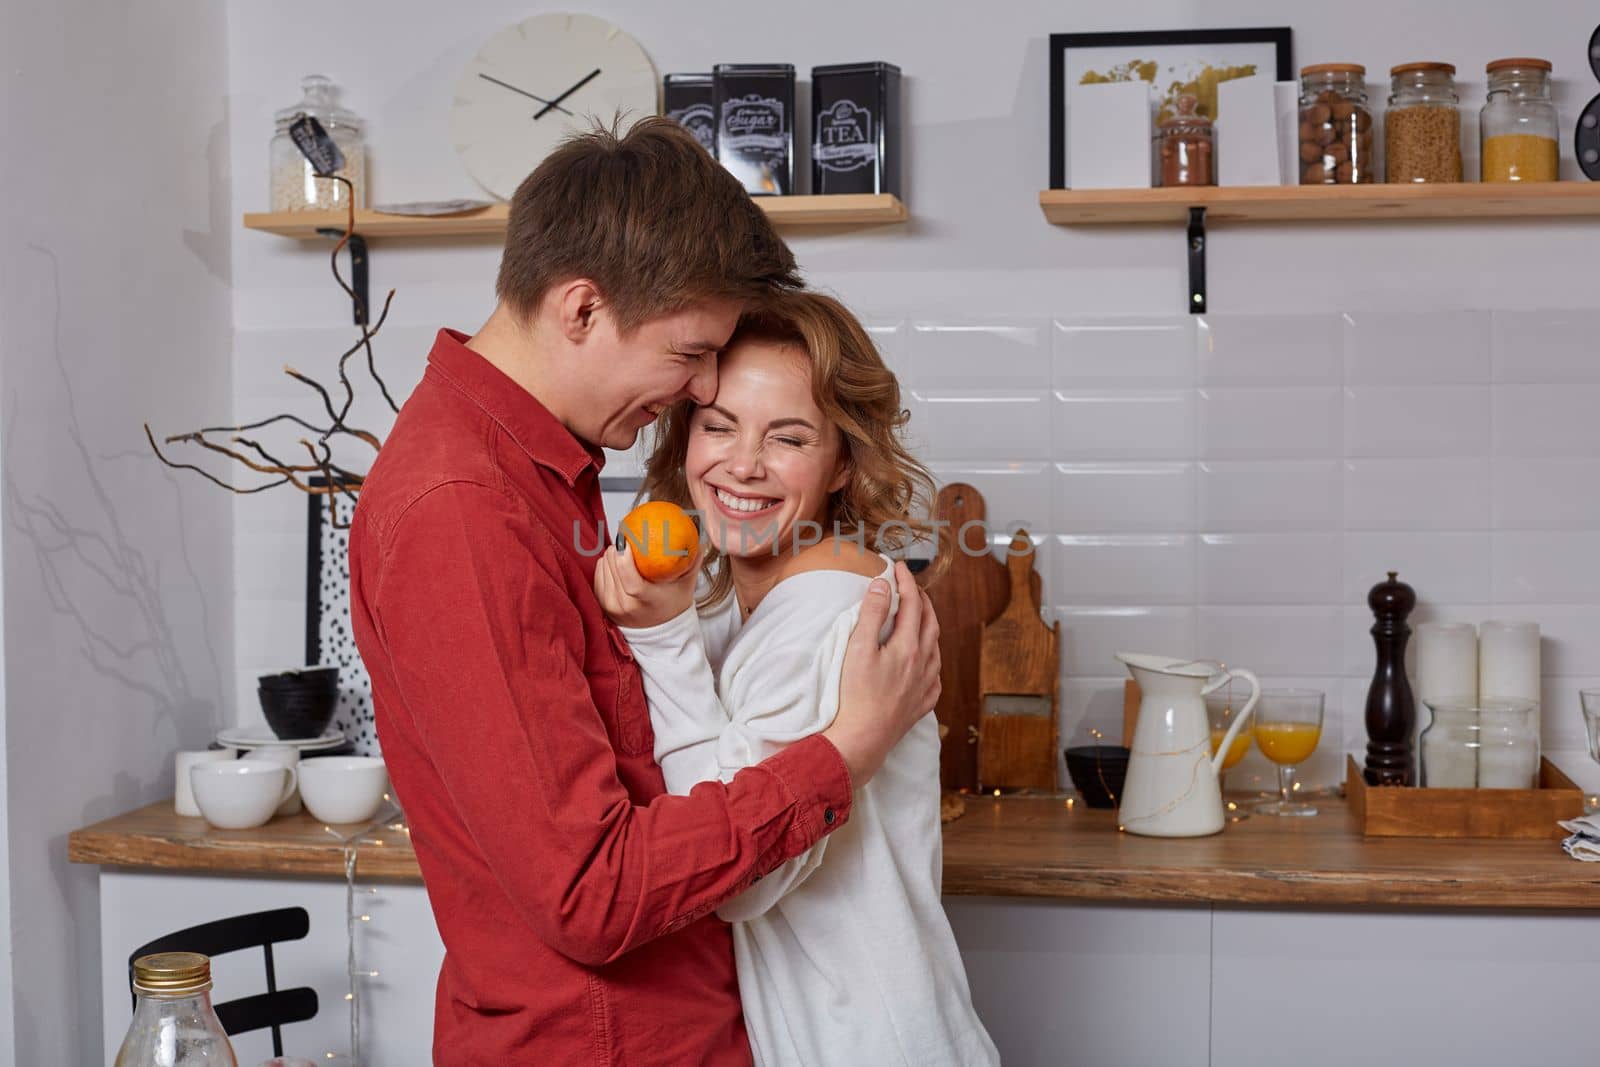 Happy young lovely couple on kitchen hugging each other. They enjoy spending time togehter. They show emotions to each other